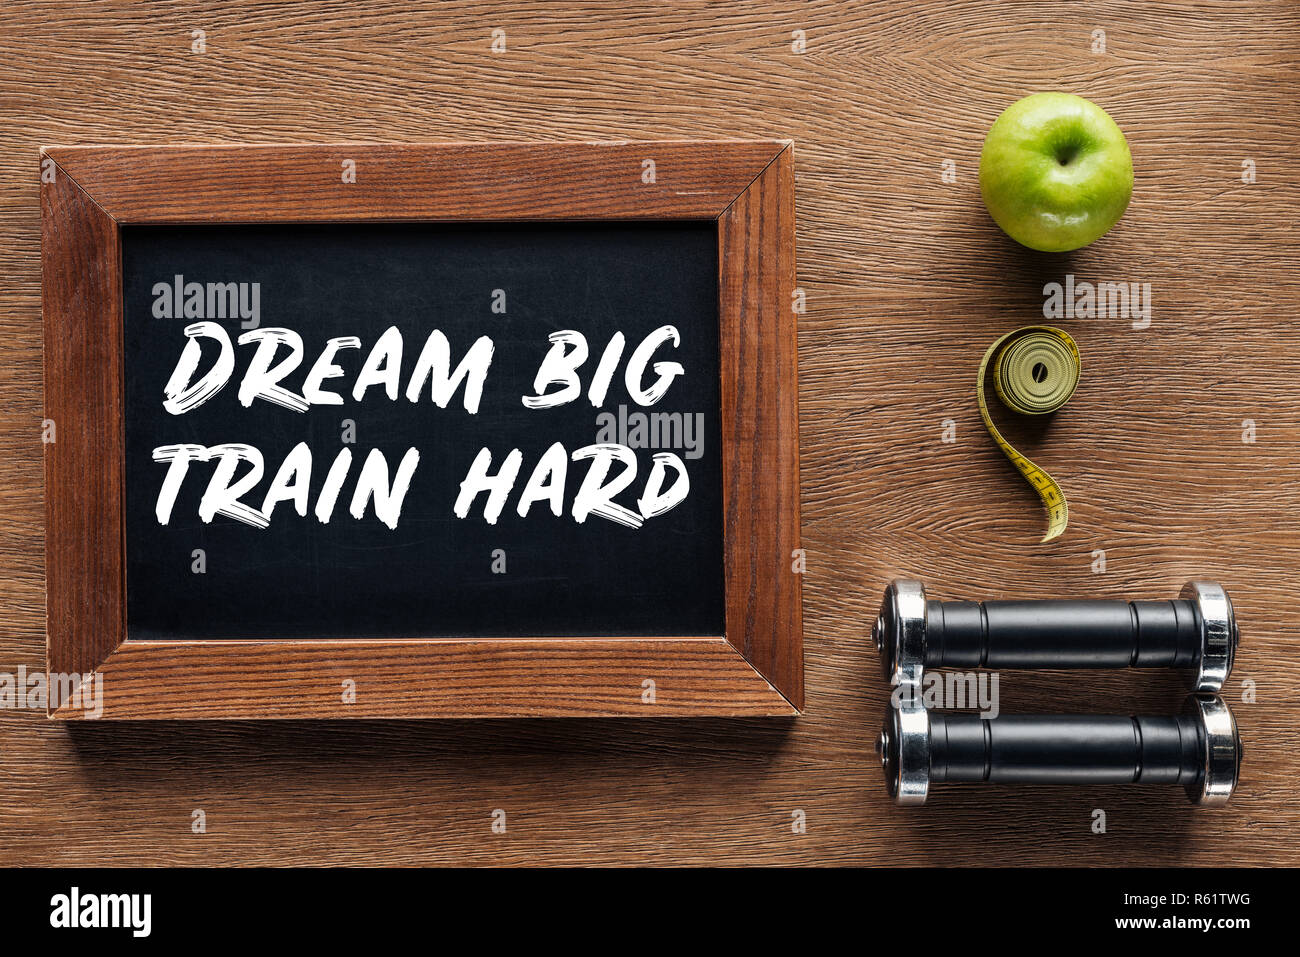 apple, dumbbells, measuring tape and wooden chalk board with 'dream big train hard' quote, dieting and healthy lifesyle concept Stock Photo